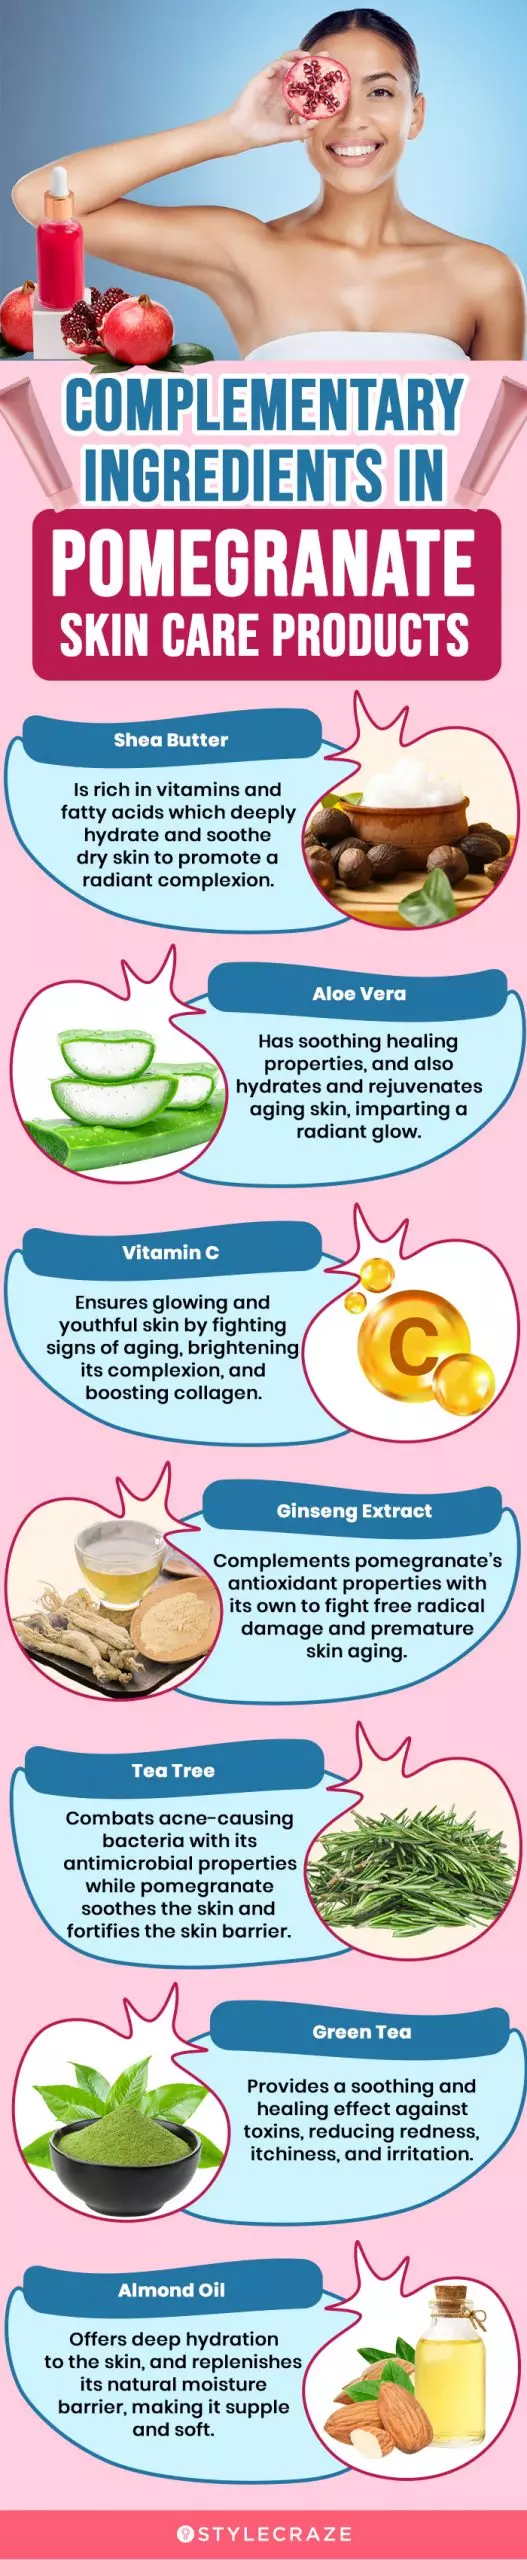 Complementary Ingredients In Pomegranate Skin Care Products (infographic)